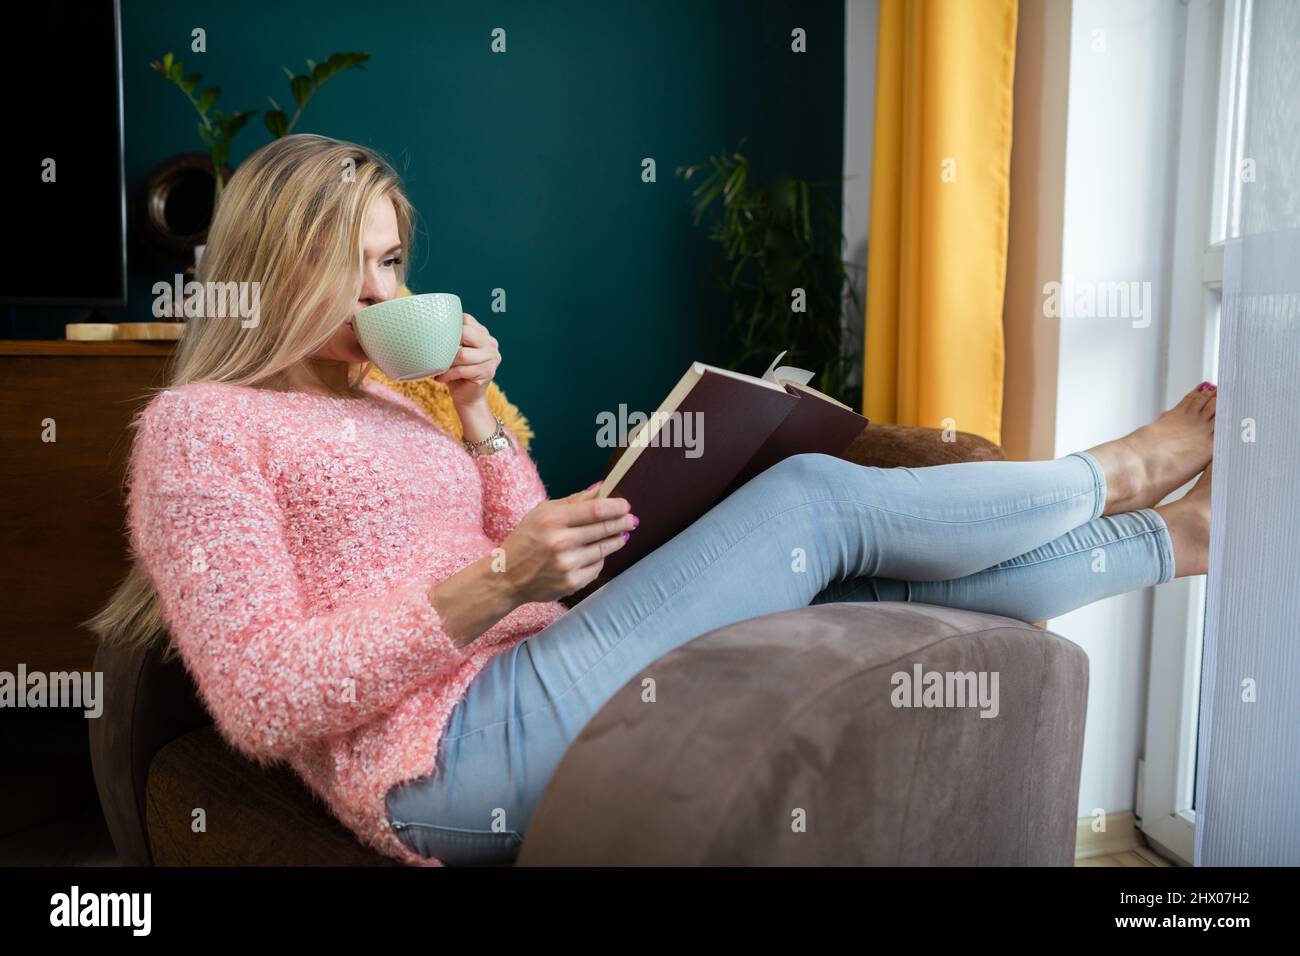 A girl relaxes by reading a book and drinking coffee. Stock Photo